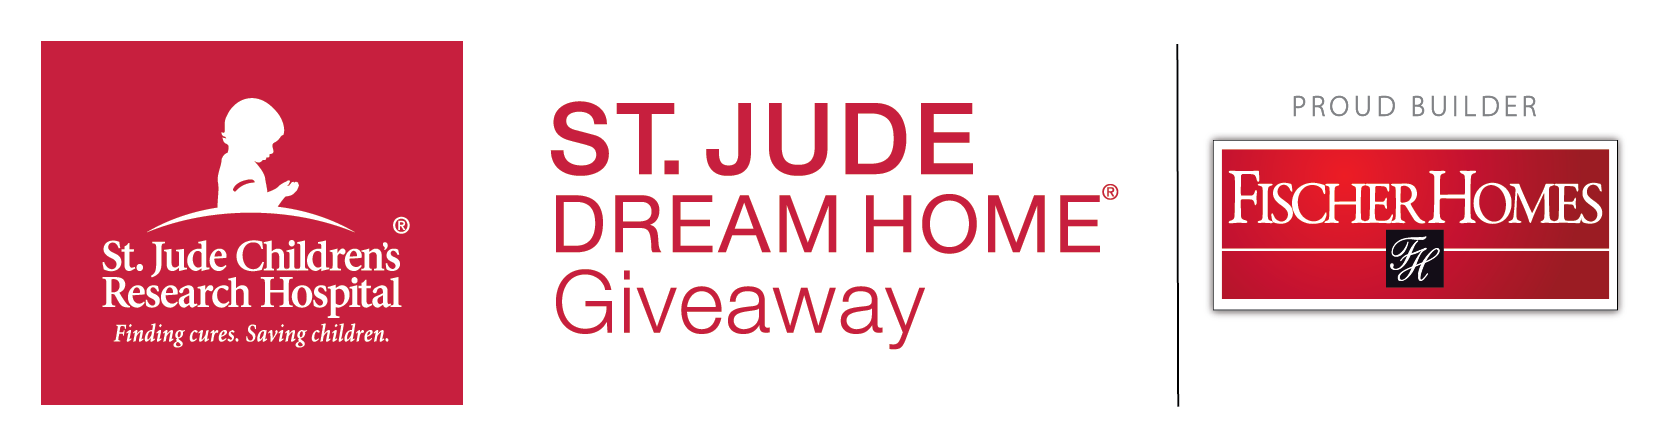 Fischer Homes is a proud builder of the St. Jude Dream Home giveaway, with us being the first builder to execute 3 homes in a year.